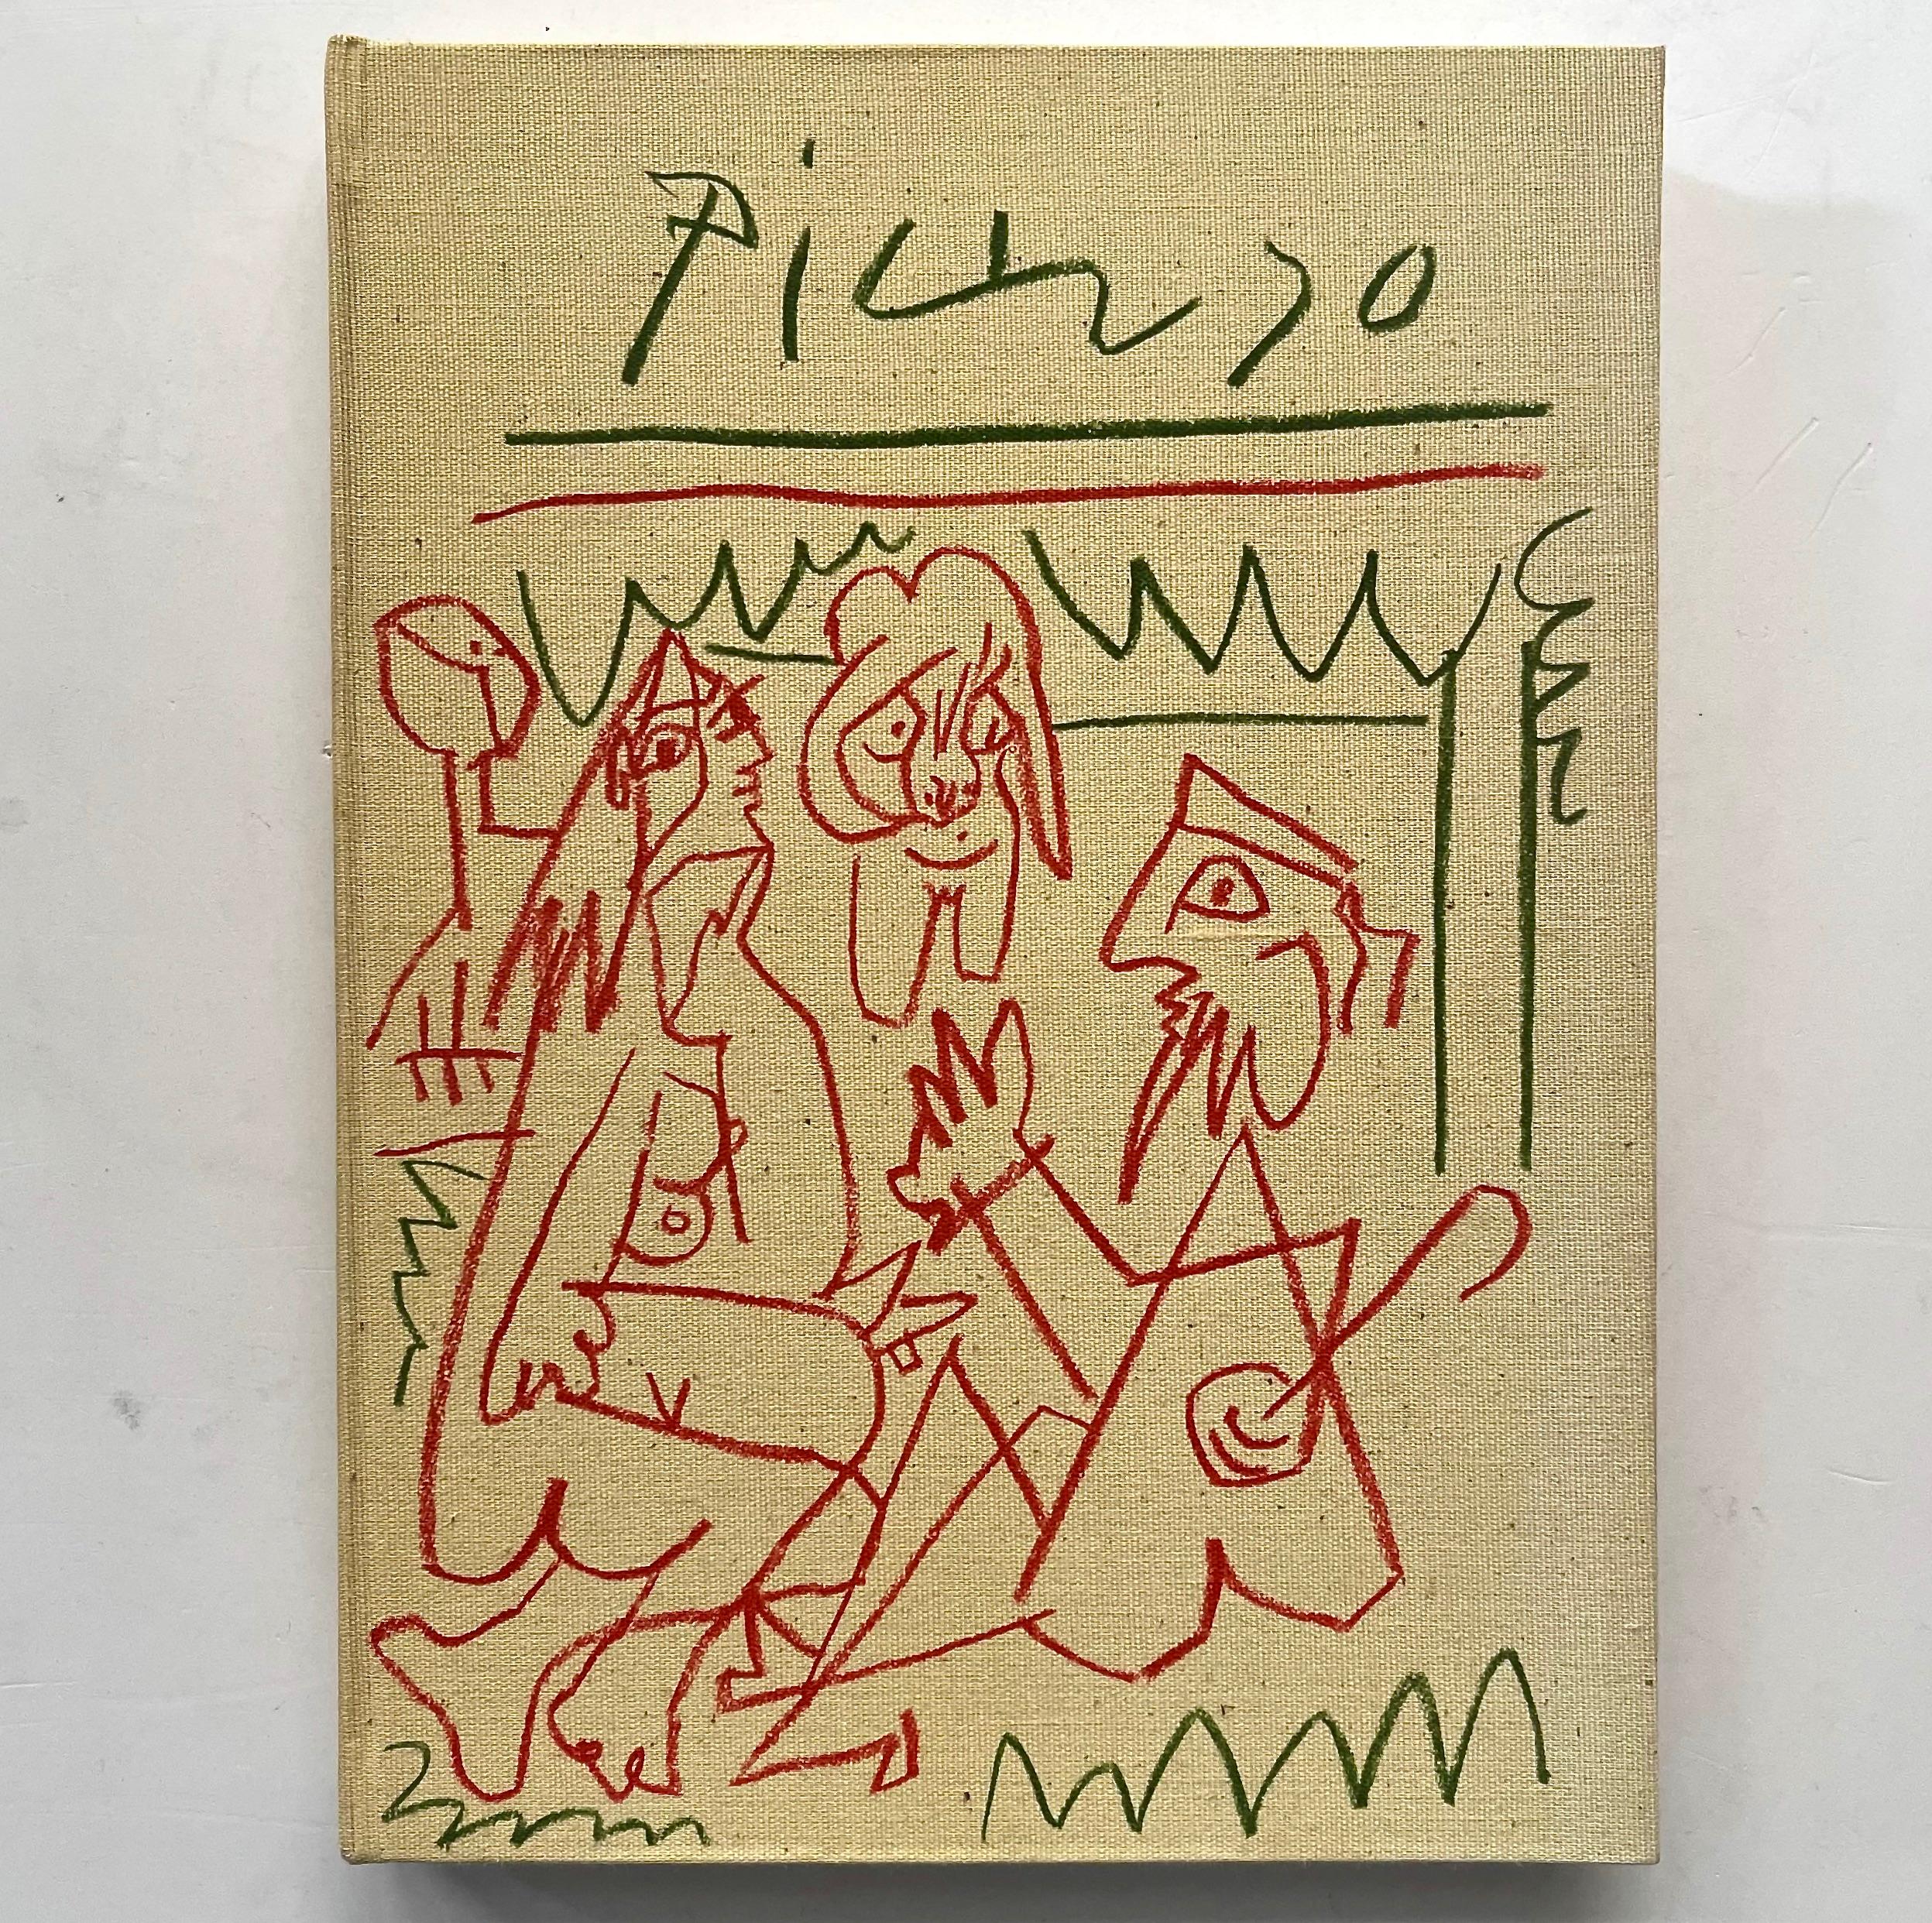 Les Déjeuners - Picasso, 1st French edition, 1962 Published by Éditions Circle D’art Paris, 1962  
A beautiful copy of Picasso’s seminal book Les Déjeuners complete with fine cloth slipcase and printed beige boards.  Profusely Illustrated throughout